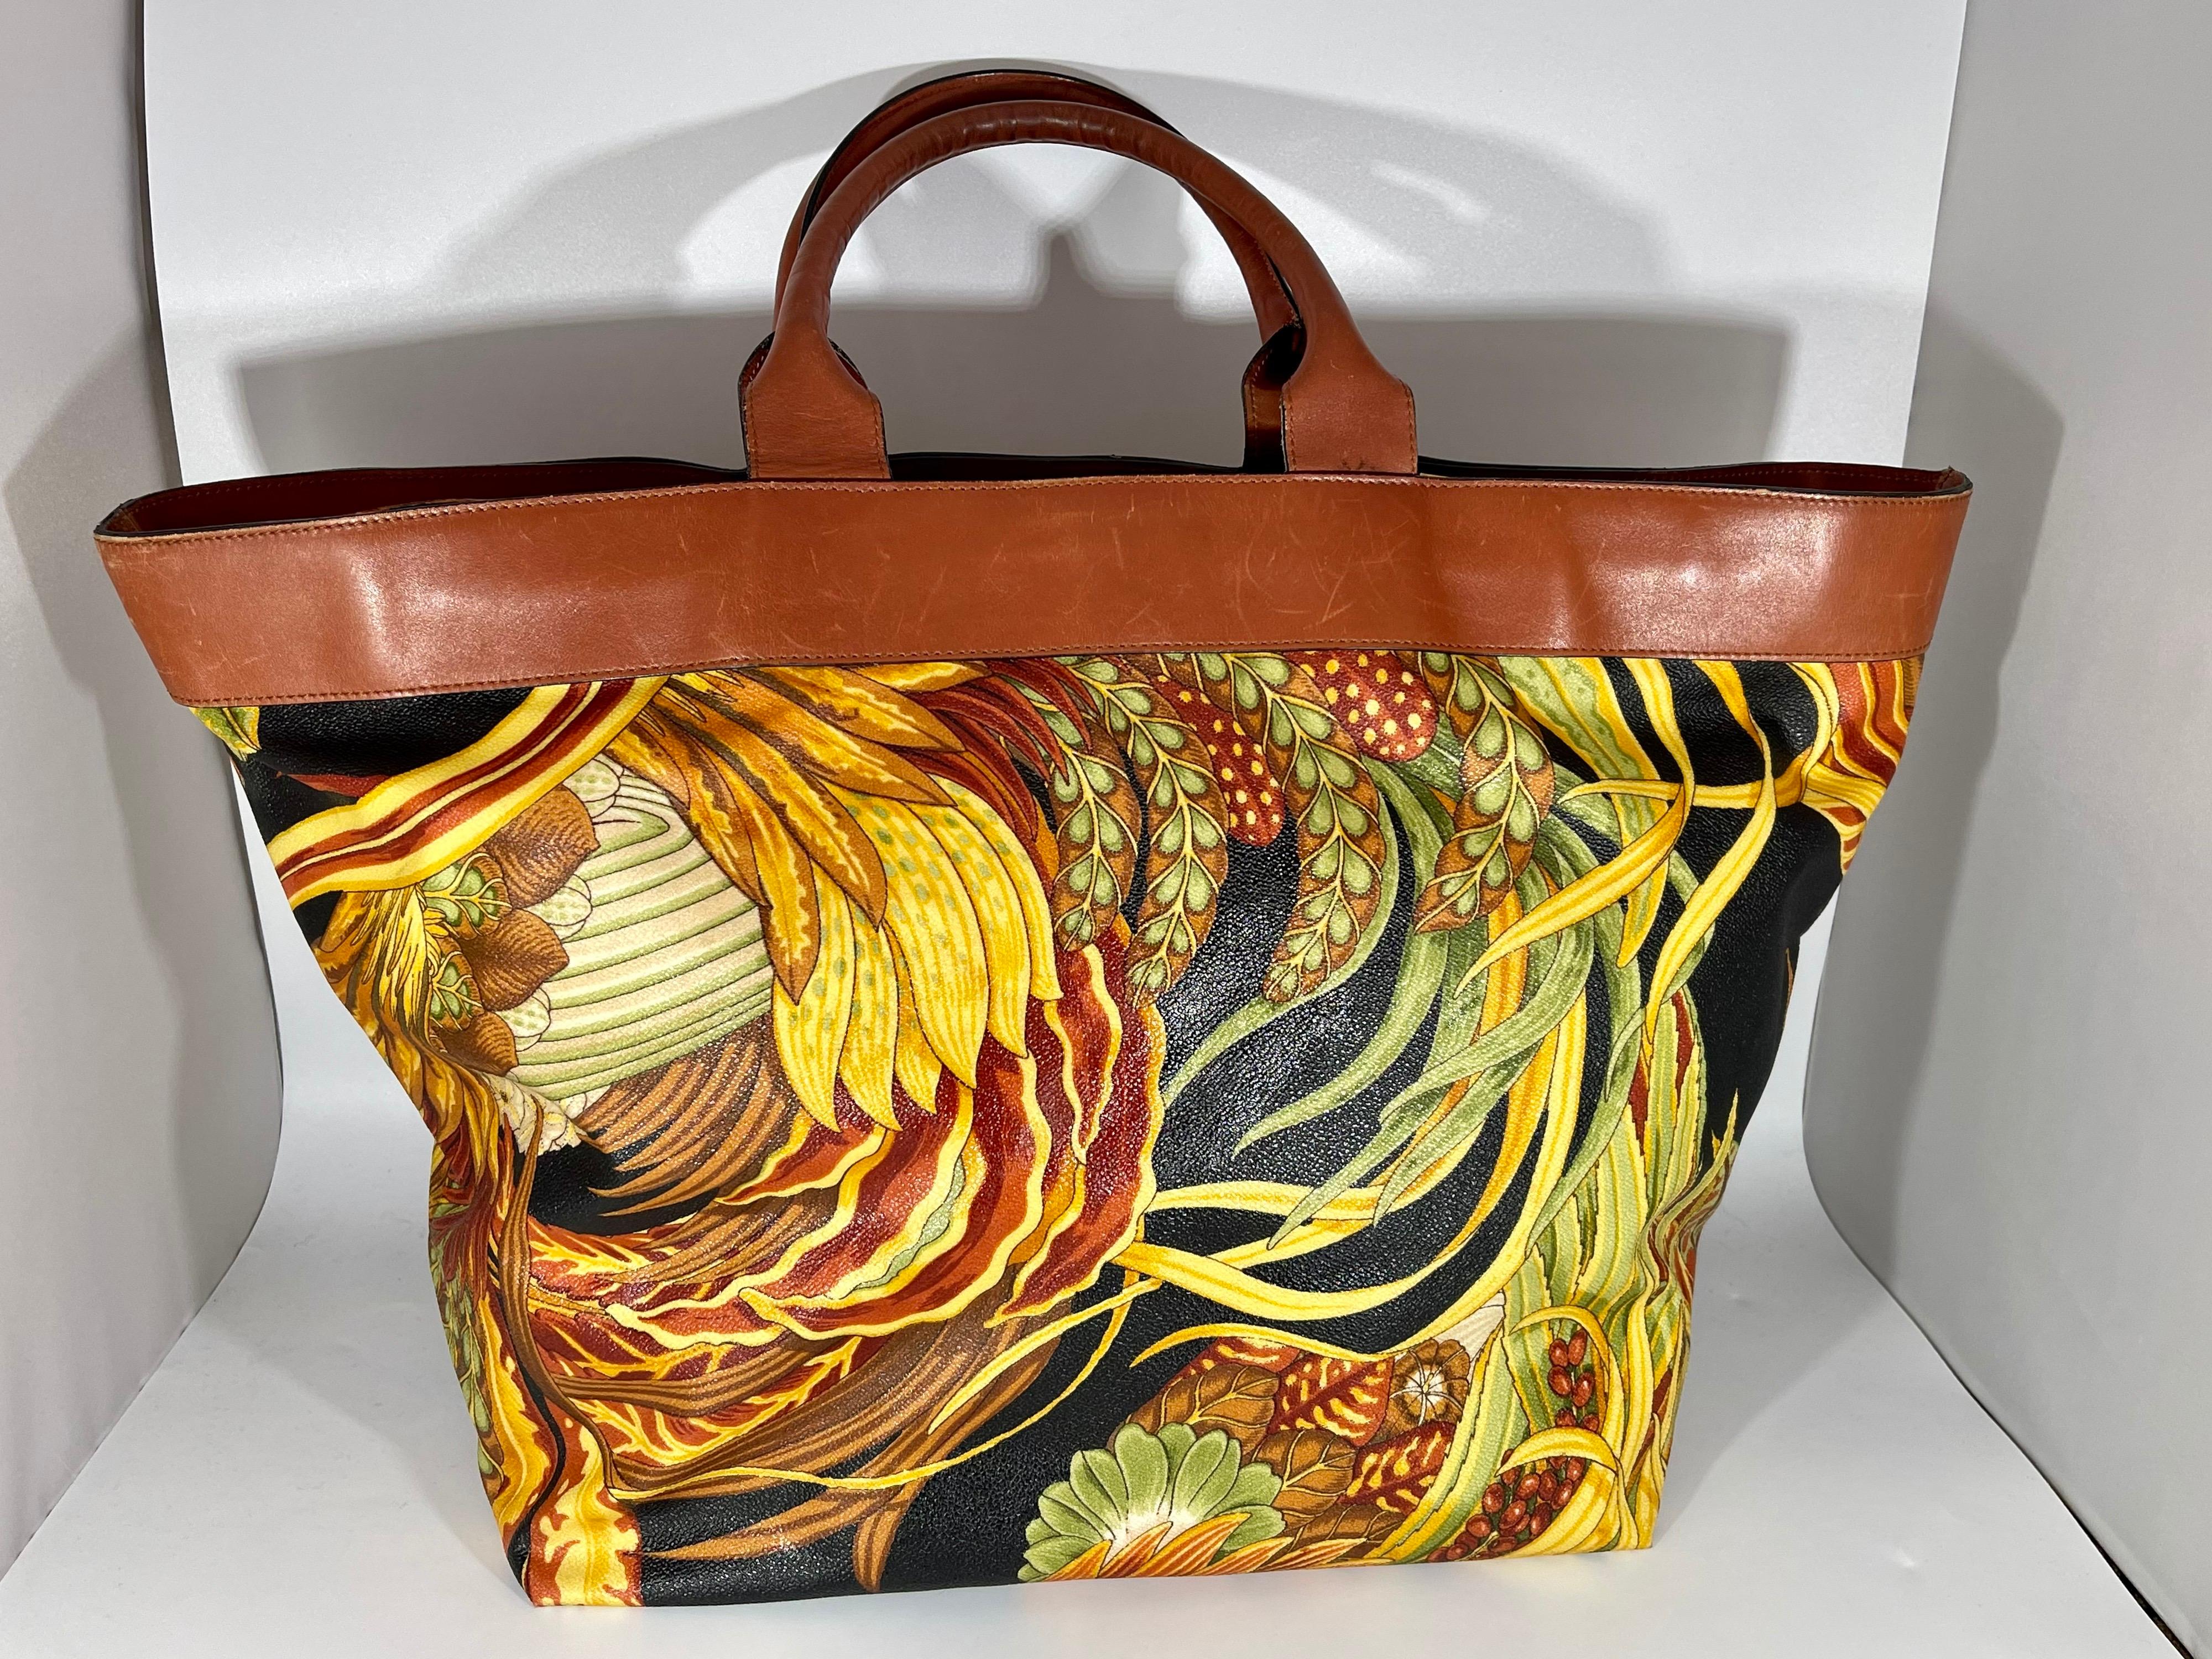 Ferragamo Travel print Tote bag Leather/Nylon Multicolor Large + matching pouch
Salvatore Ferragamo  Multicolor Large Tote Bag Shoulder Bag.

Great condition. Great bargain!
Good for beach , travel , luggage
Rare and beautiful Nylon & Leather Tote